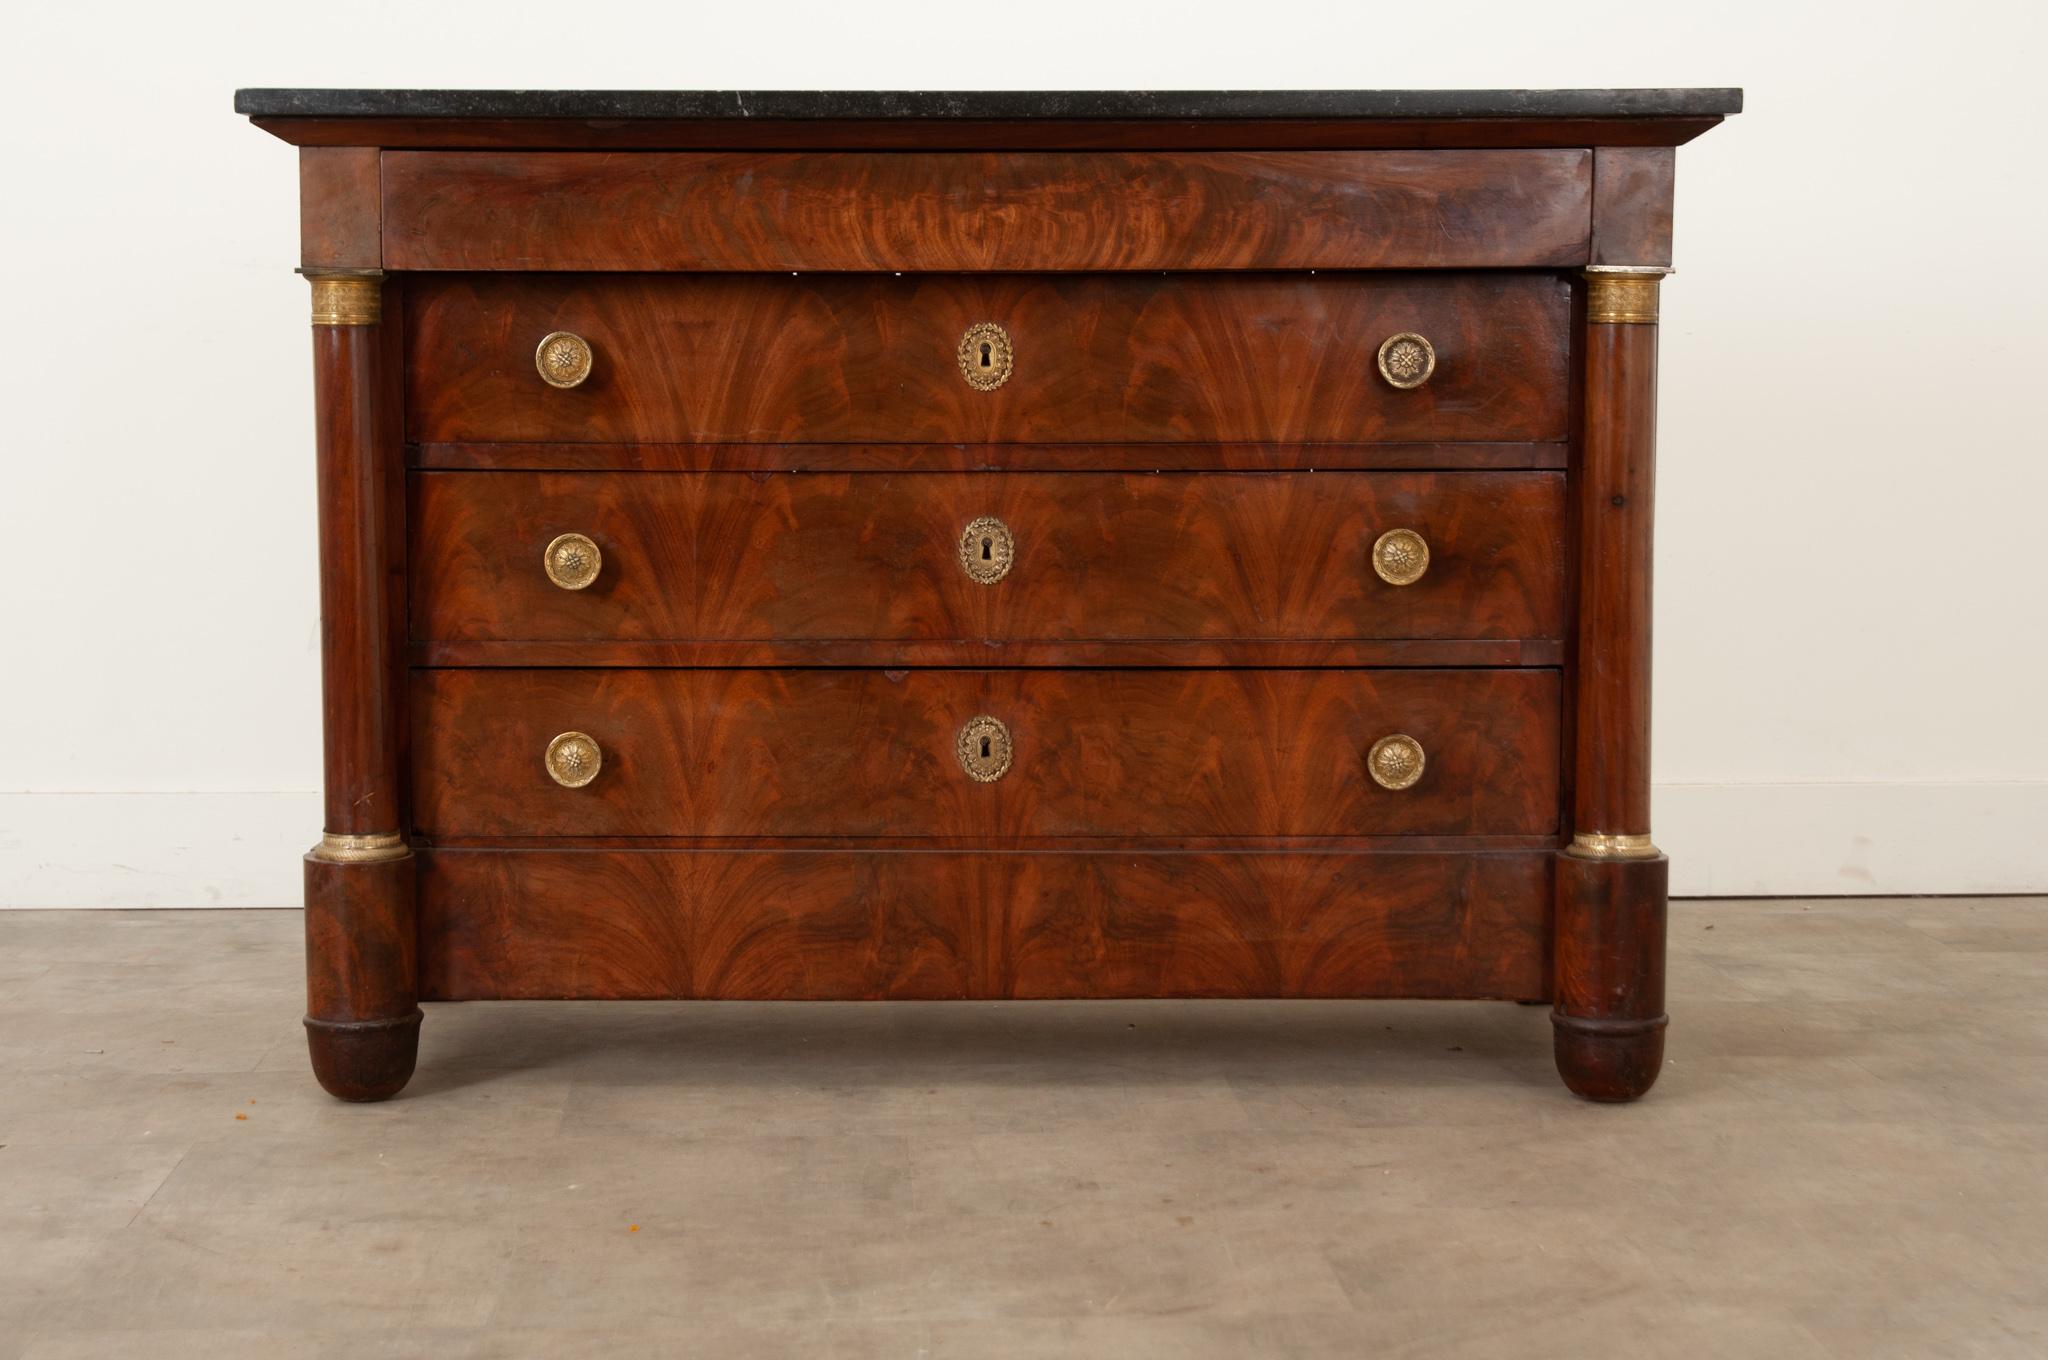 A classic French Empire commode topped with its original black marble. This commode is finished in warm bookmatched burl mahogany. There are four drawers total. At the top is a single drawer opened with a hidden under-drawer pull. Below are three